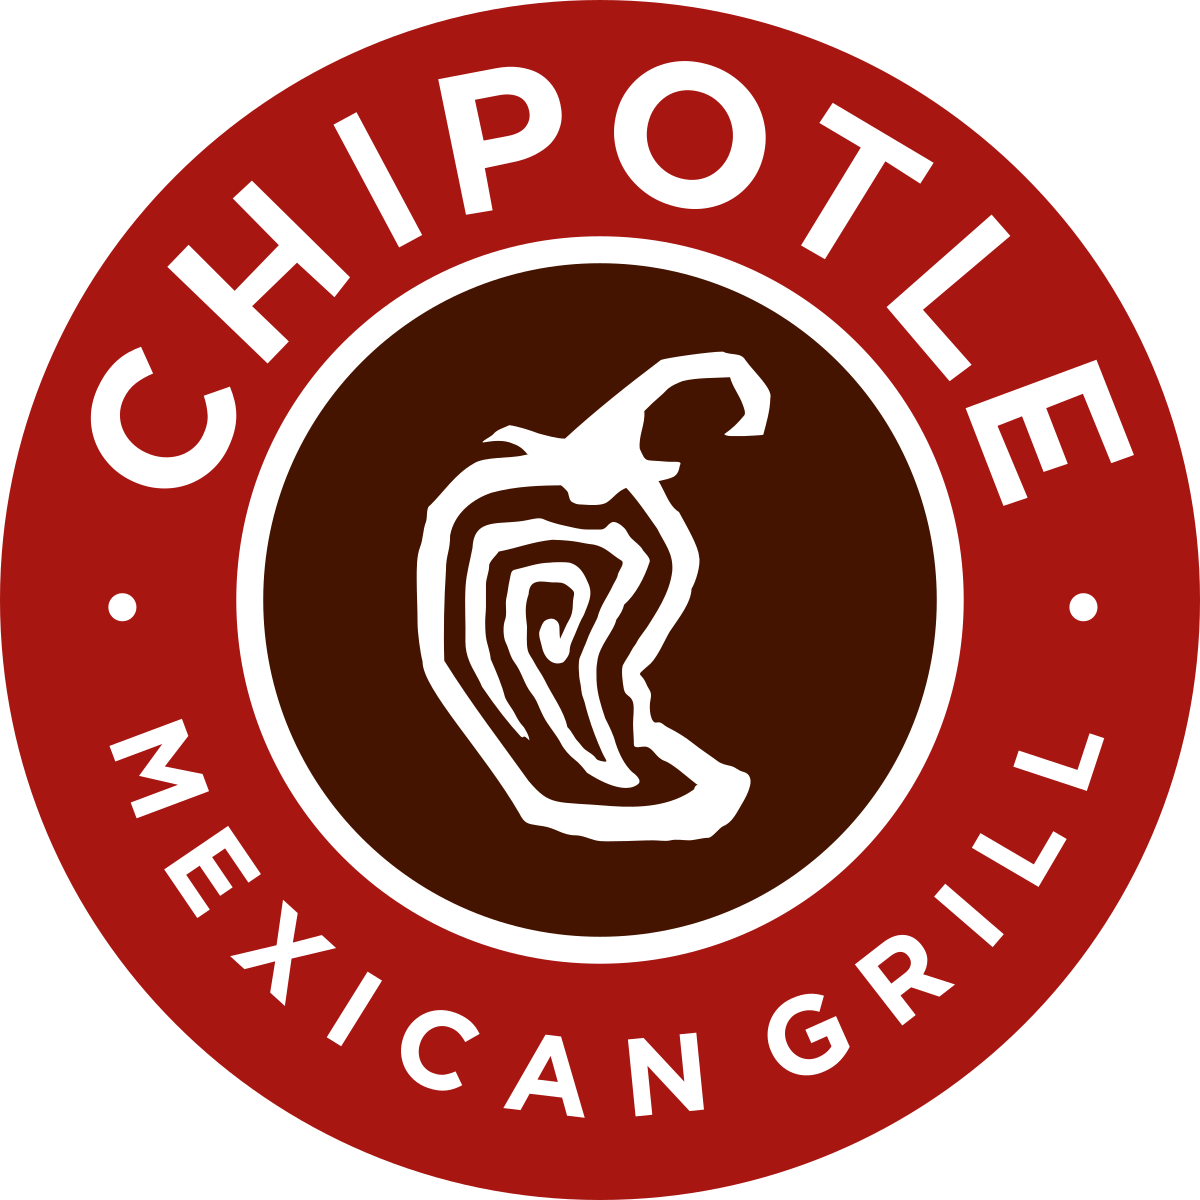 6048715 - Chipotle Mexican Grill (1200x1200)